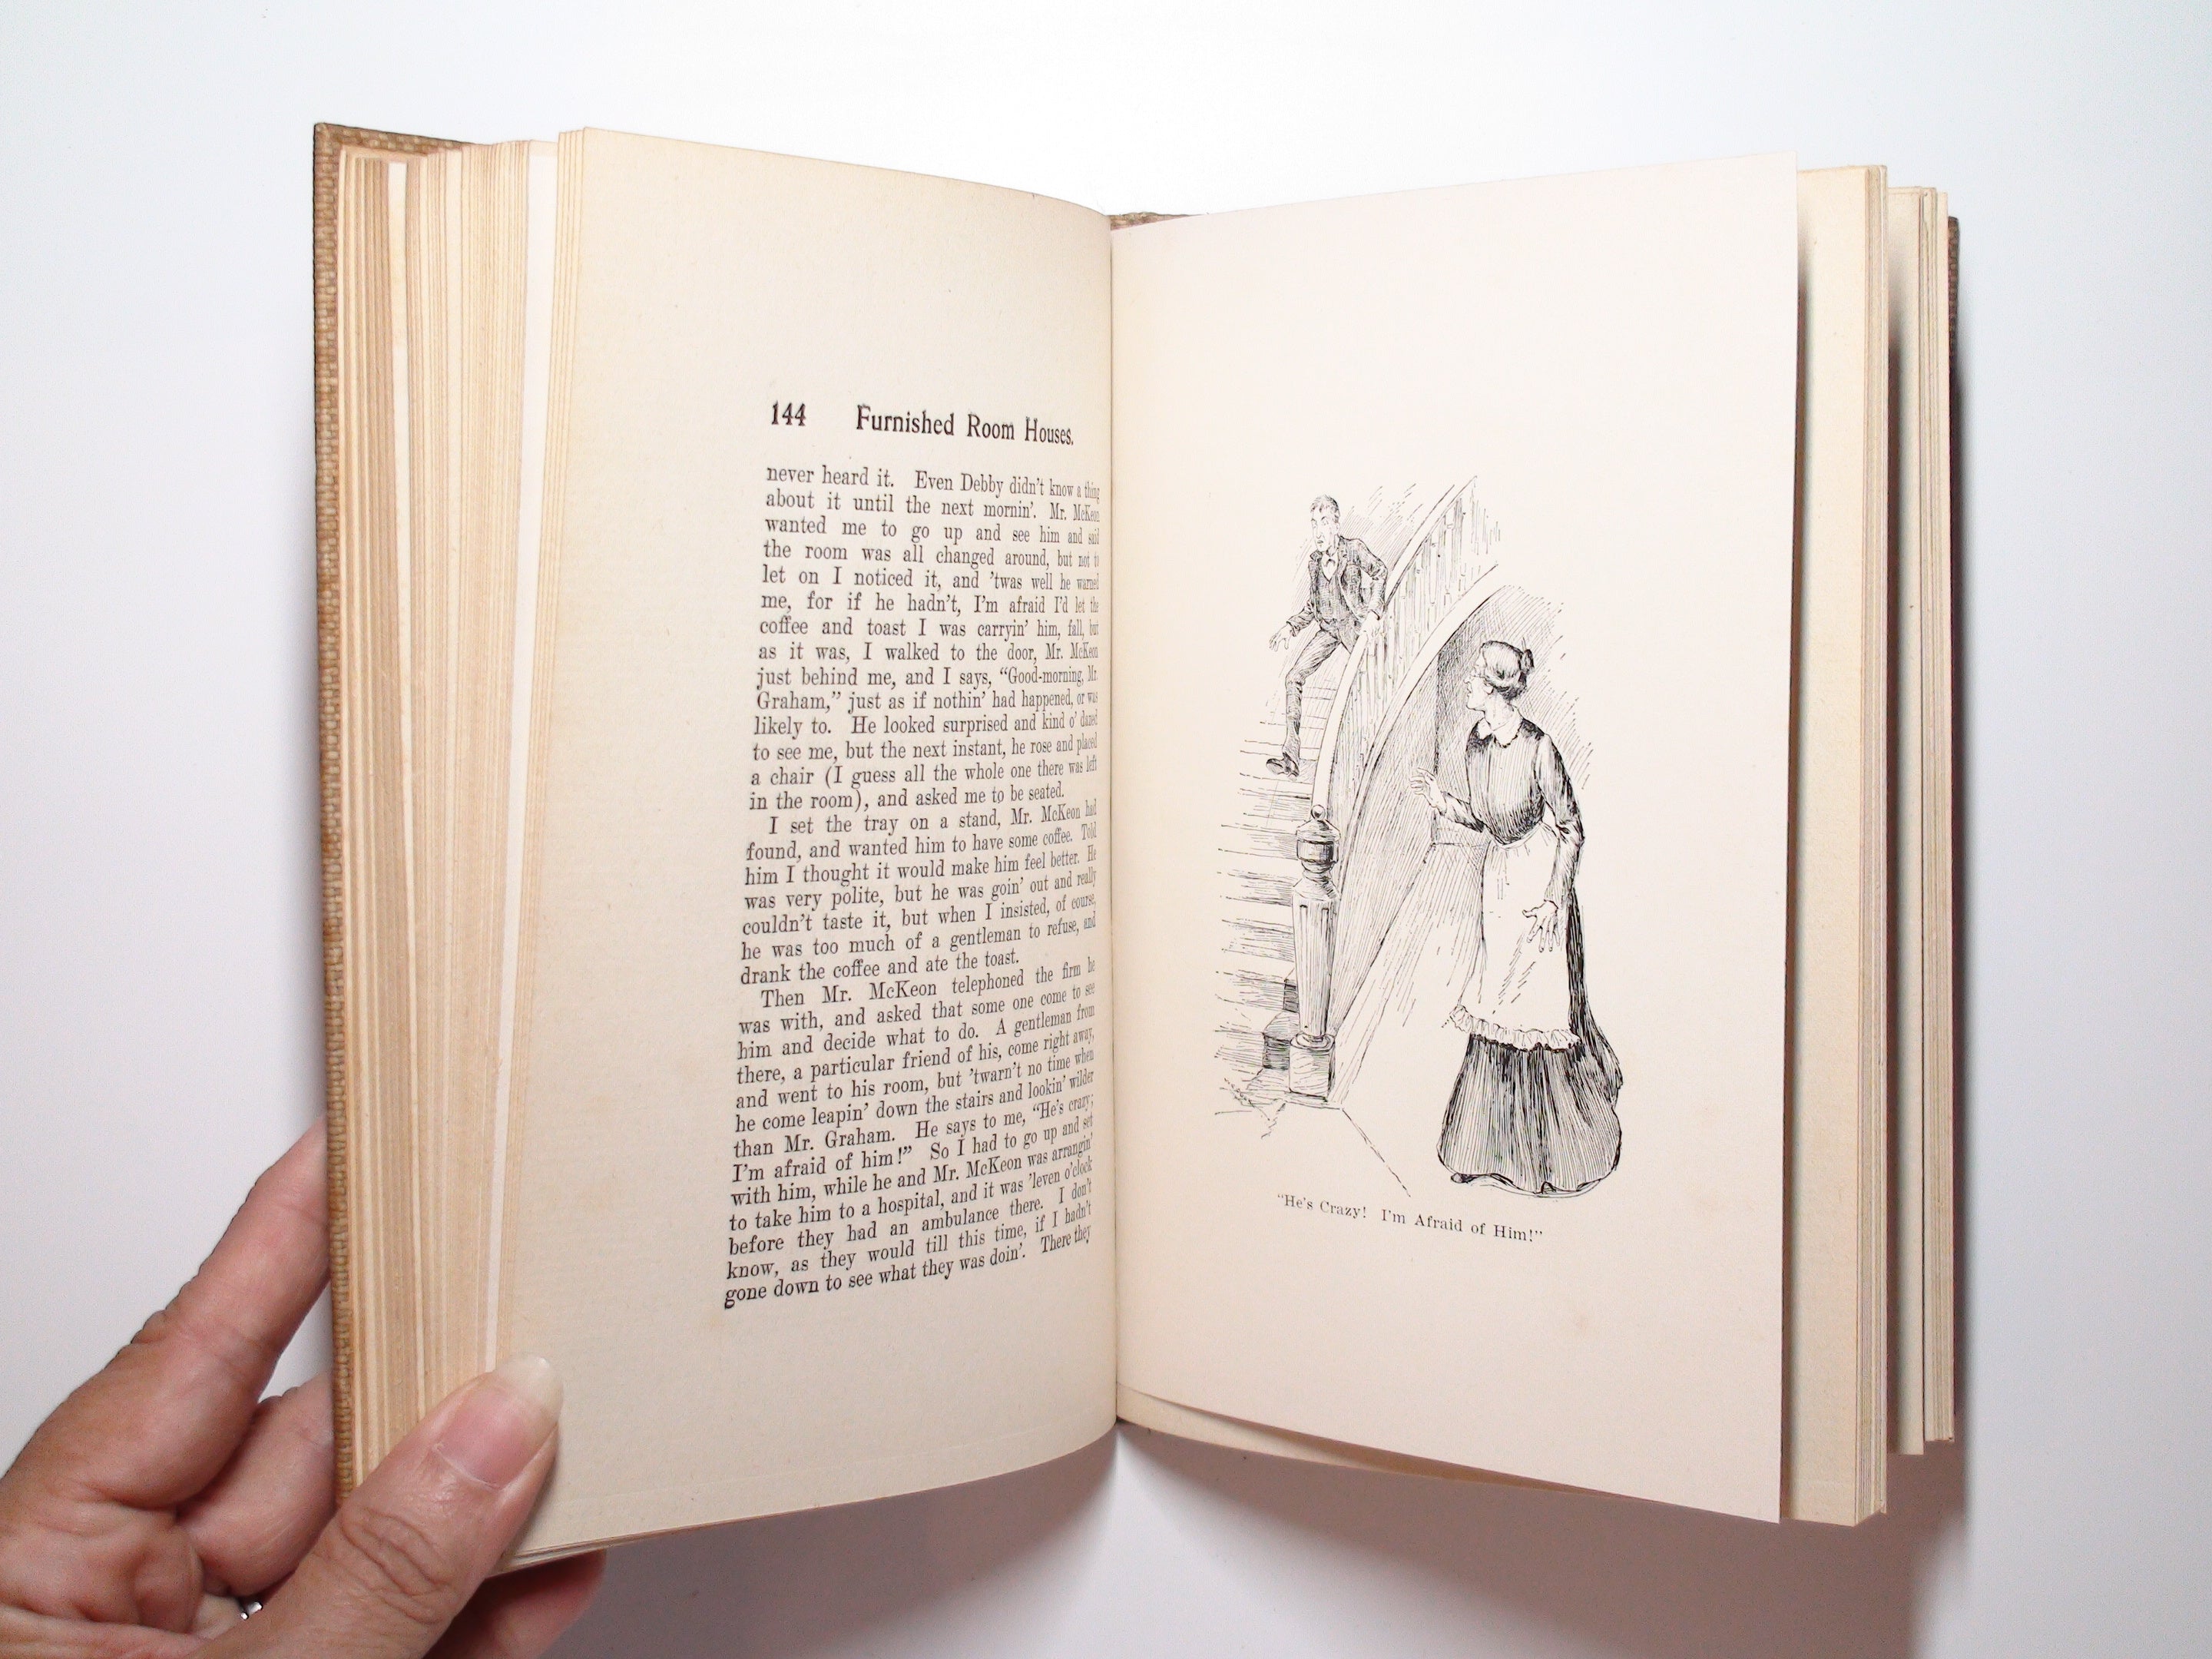 Furnished Room Houses, A Tale of New York City, by Annie M. Burdick, Illustrated, 1st Ed, Rare, 1902